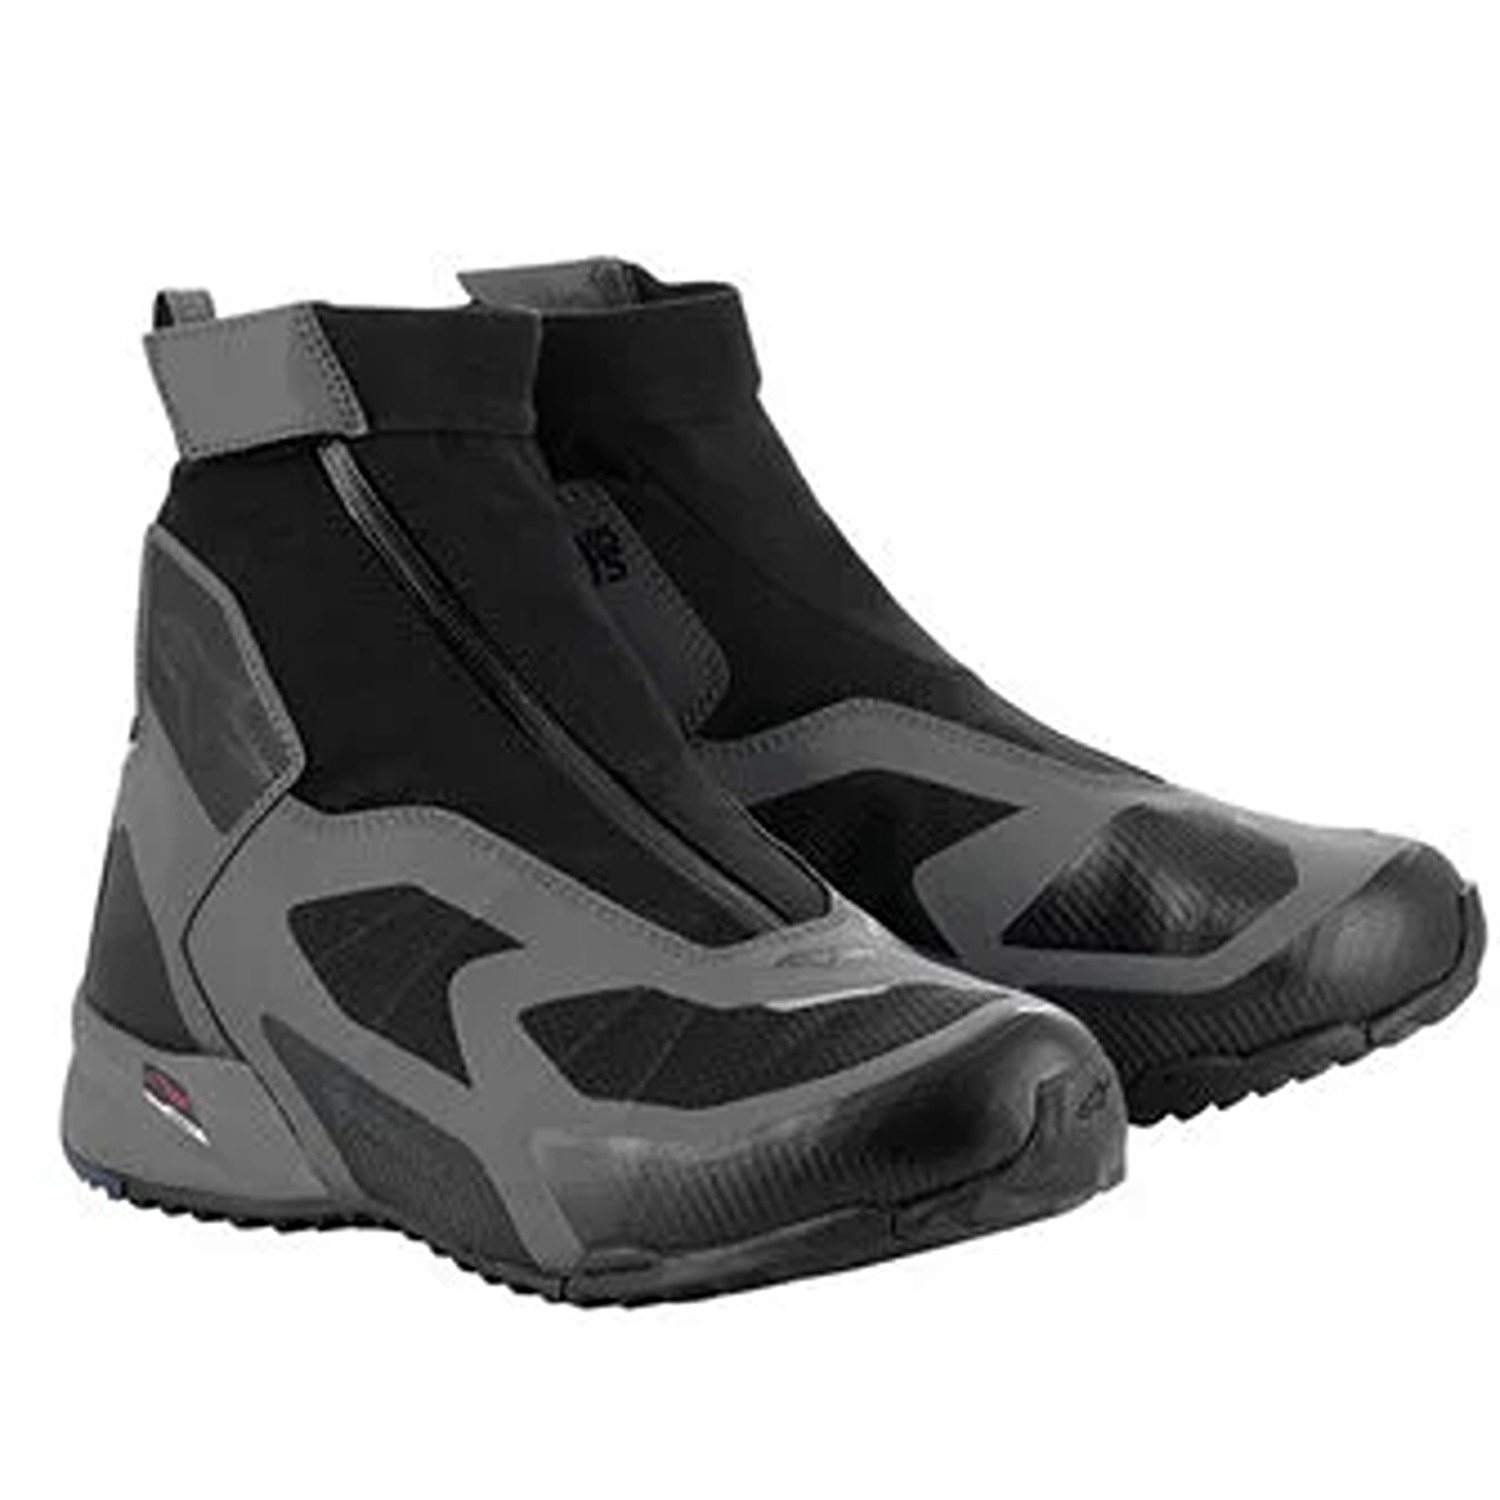 Image of Alpinestars CR-8 Gore-Tex Shoes Black Mid Gray Bright Red Size US 13 EN